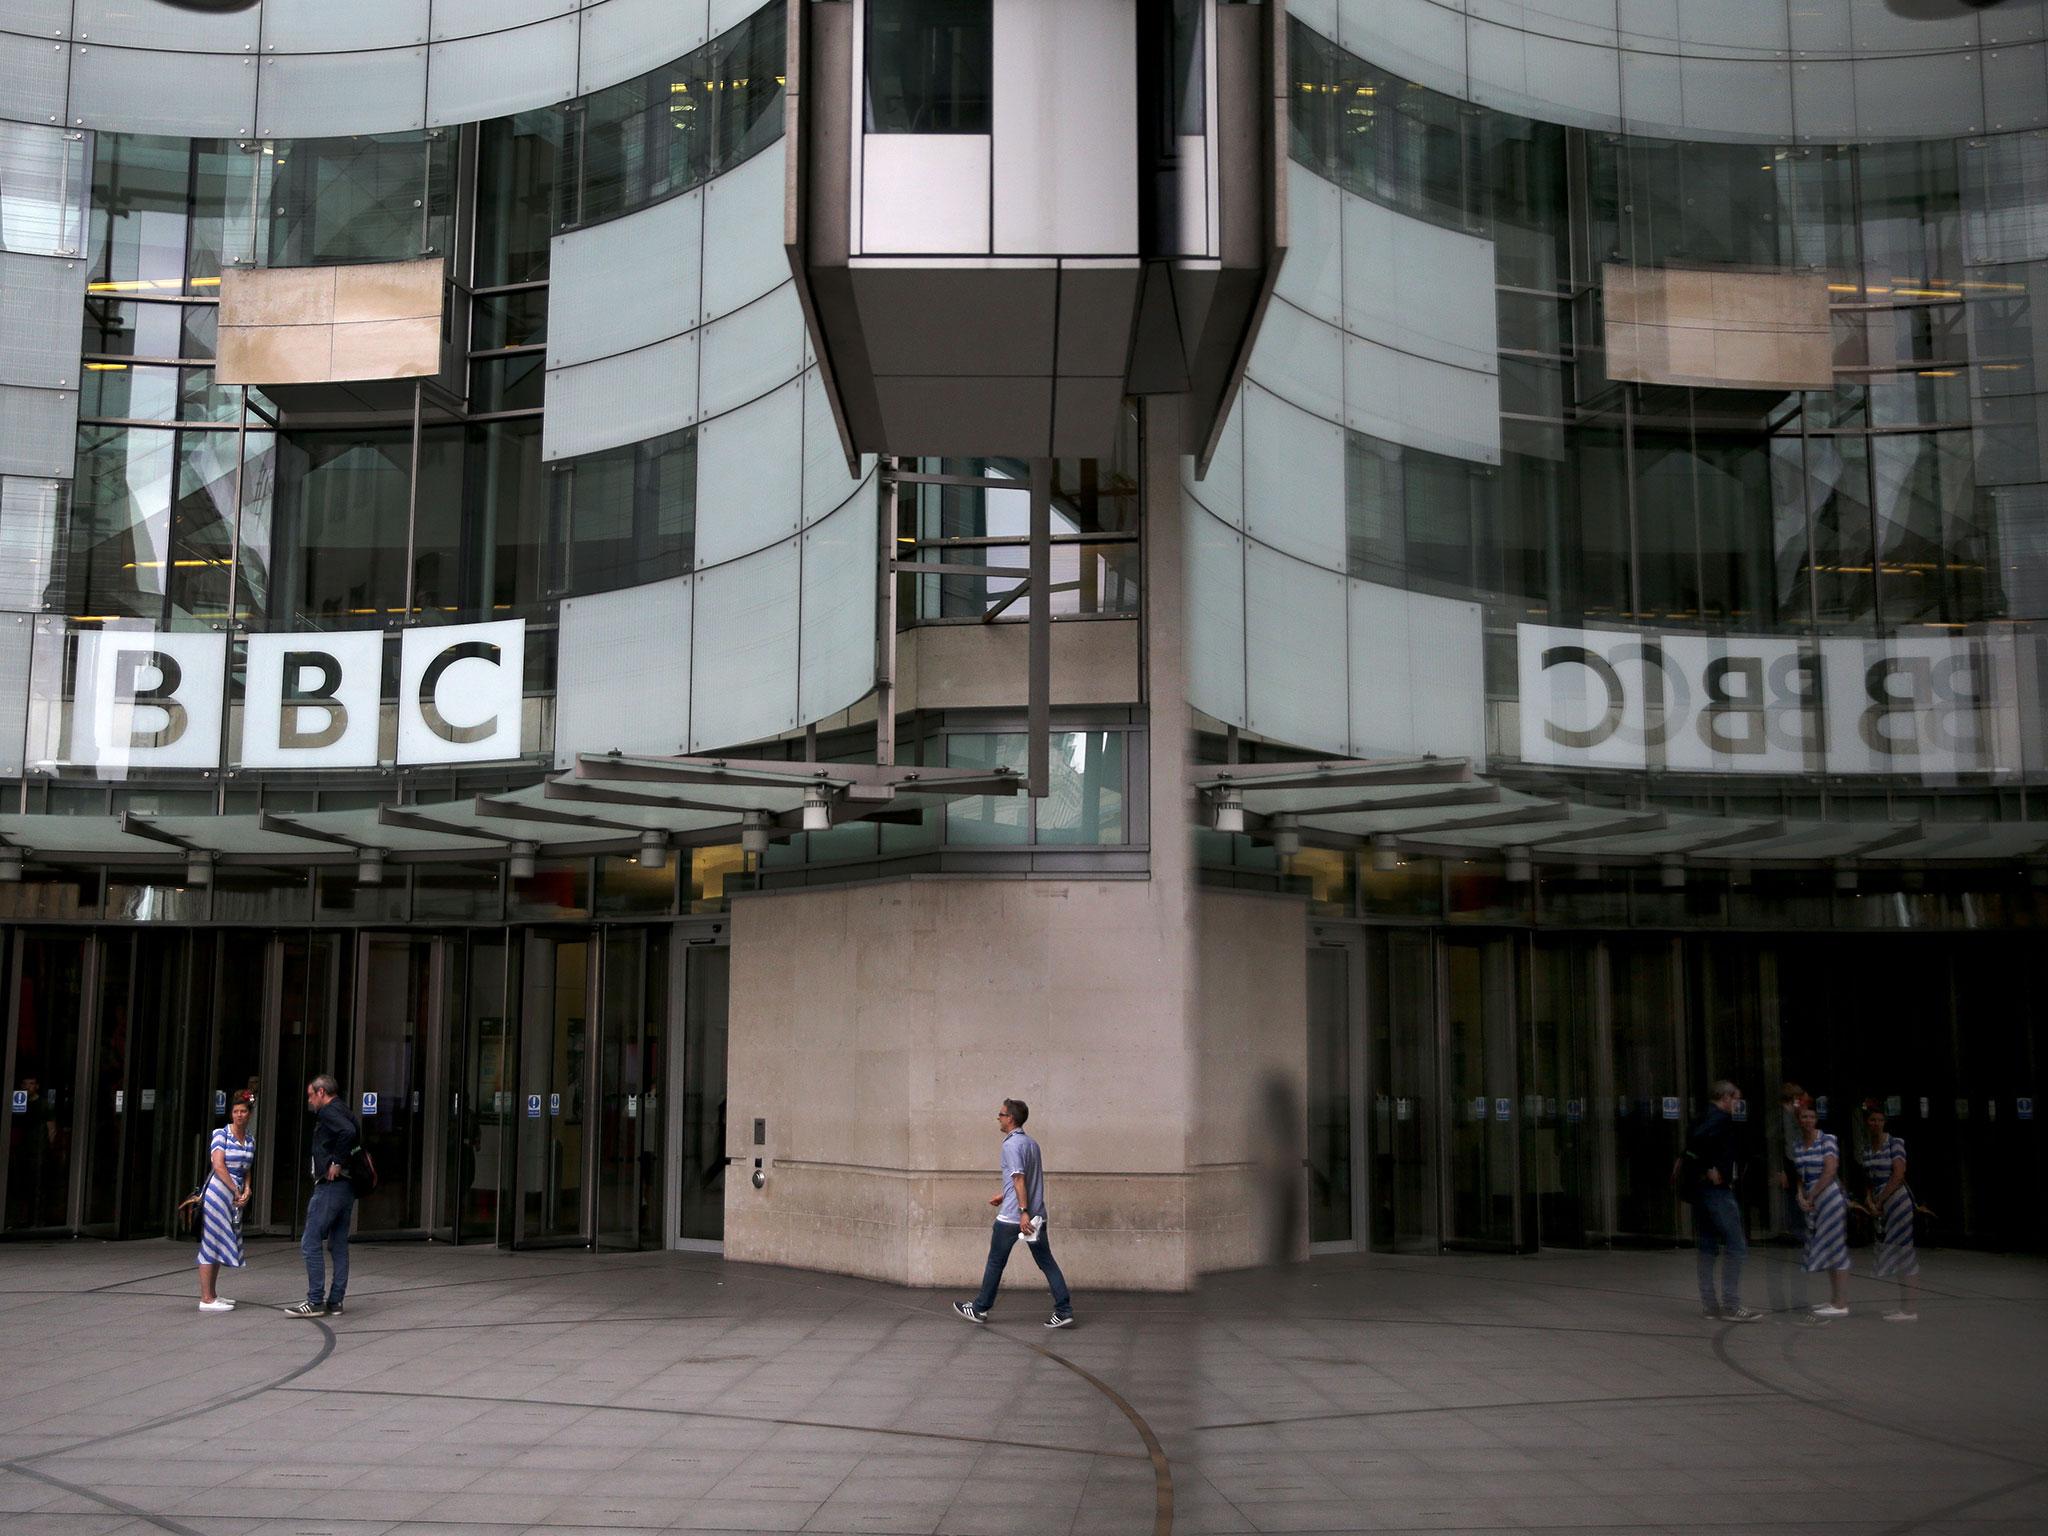 The gender pay gap across the BBC is just over 9 per cent - half the national average